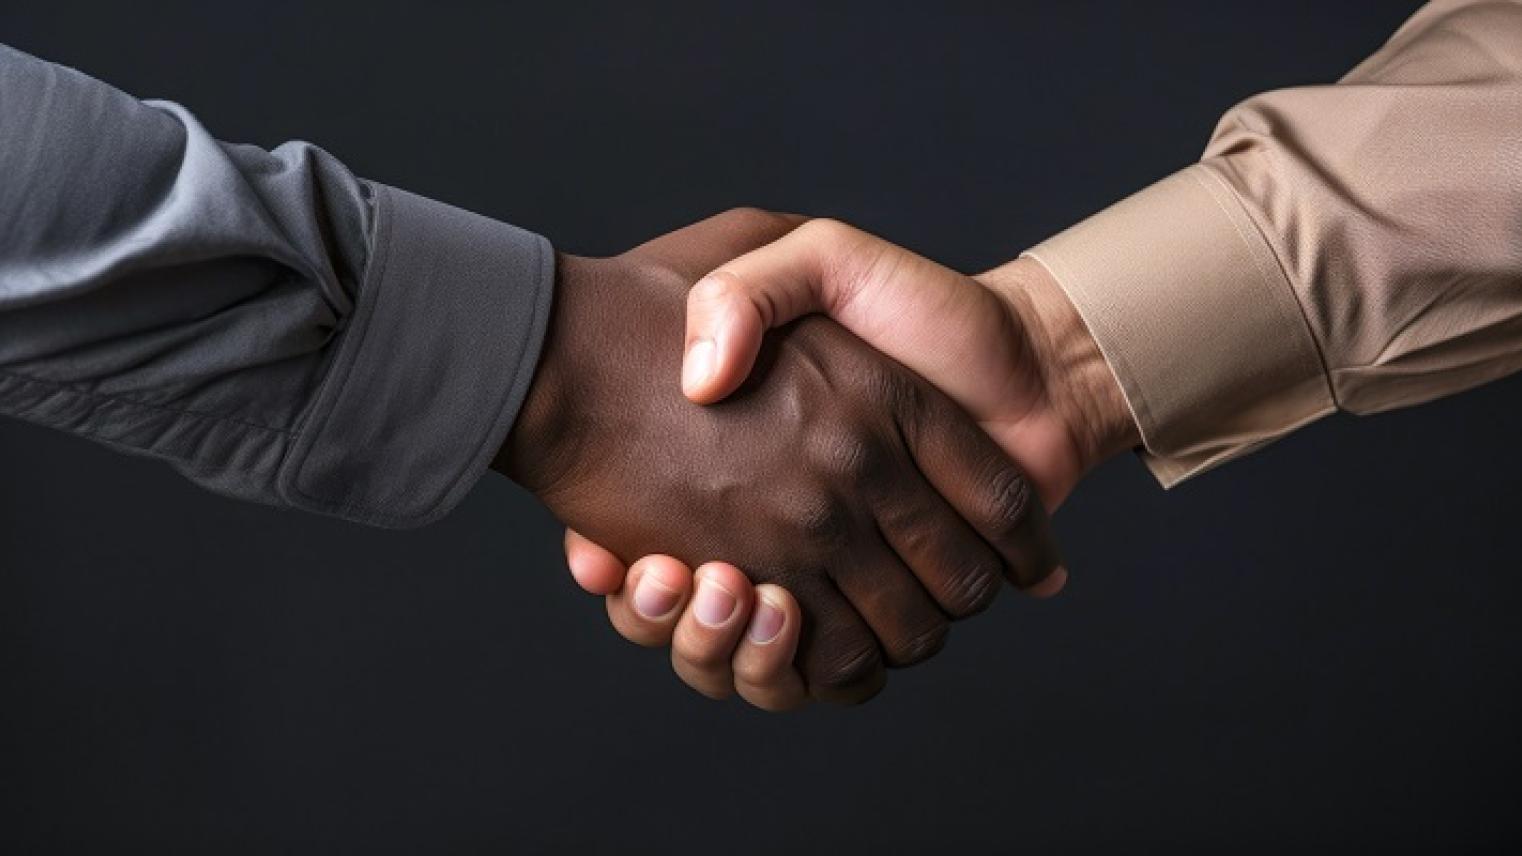 Image of dark and light skin tone hands in a handshake by vladyslav from https://stock.adobe.com/au/images/handshake-black-and-white-hand-no-racism-caucasian-human-interracial-concept-on-the-black-background-isolated/642151369 used under Education License